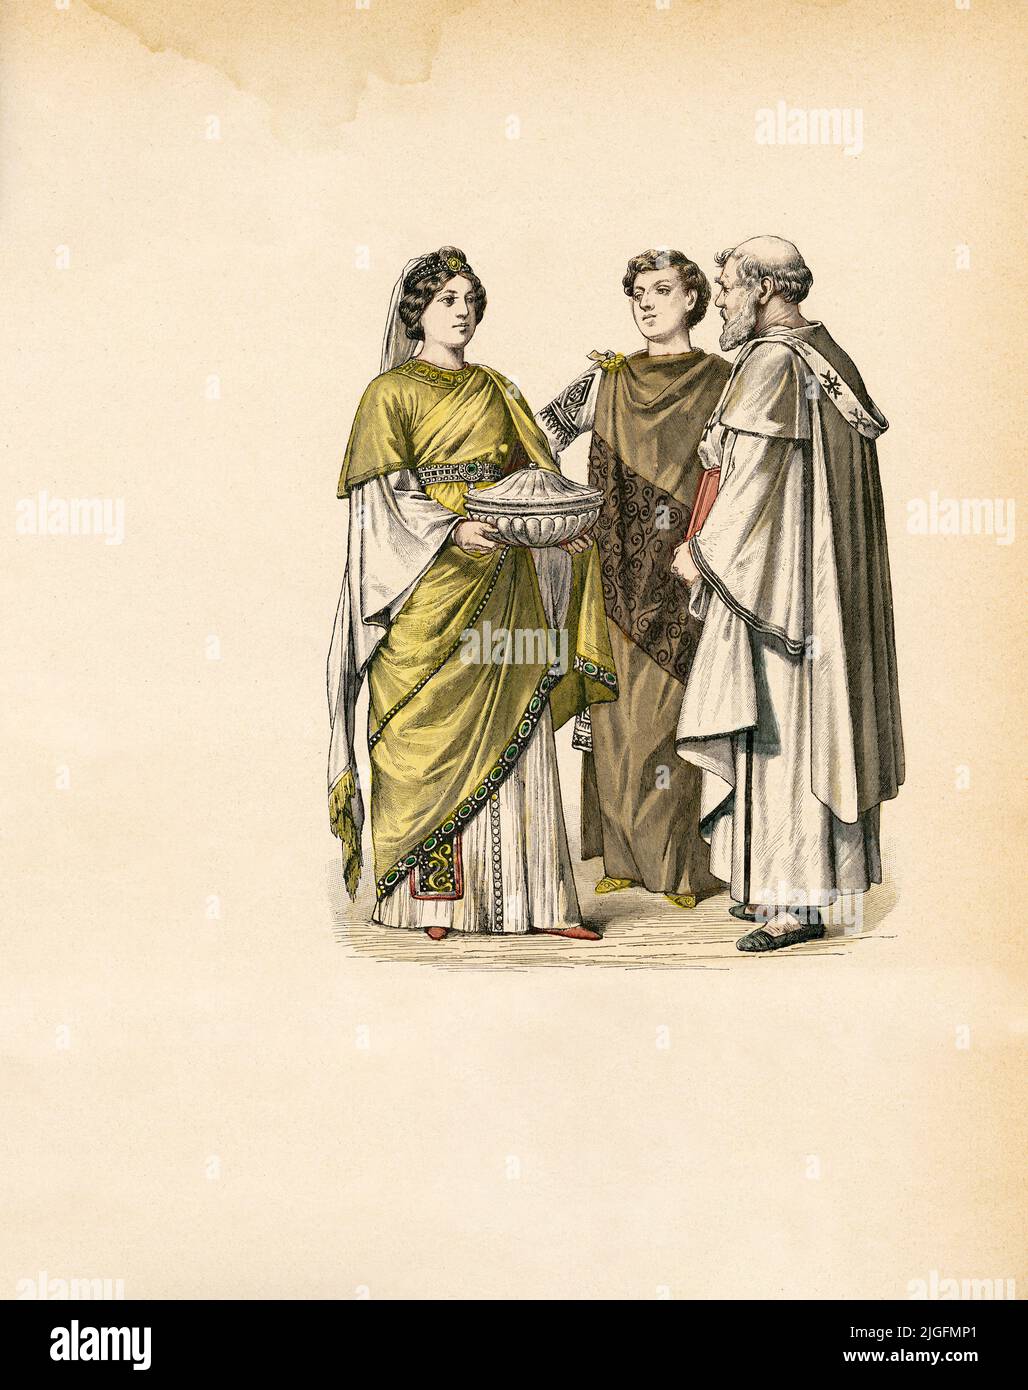 Woman with Two Men in Traditional Dress, Byzantine Empire, early 6th Century, Illustration, The History of Costume, Braun & Schneider, Munich, Germany, 1861-1880 Stock Photo